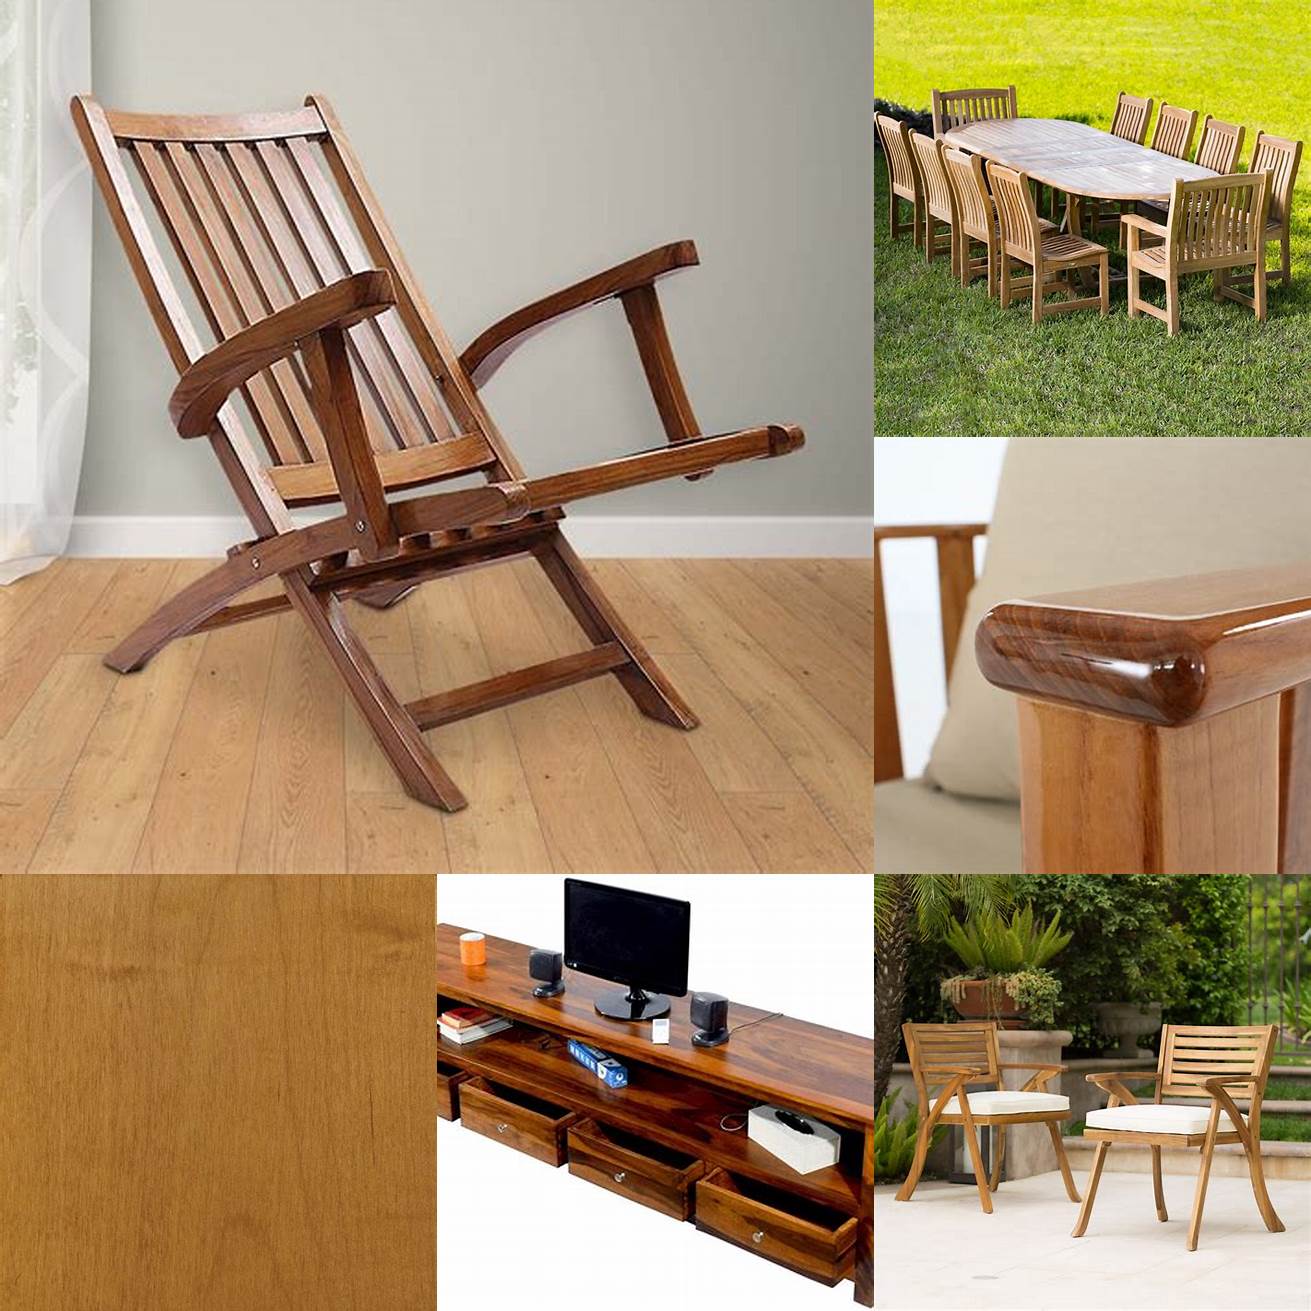 Teak furniture with a natural finish